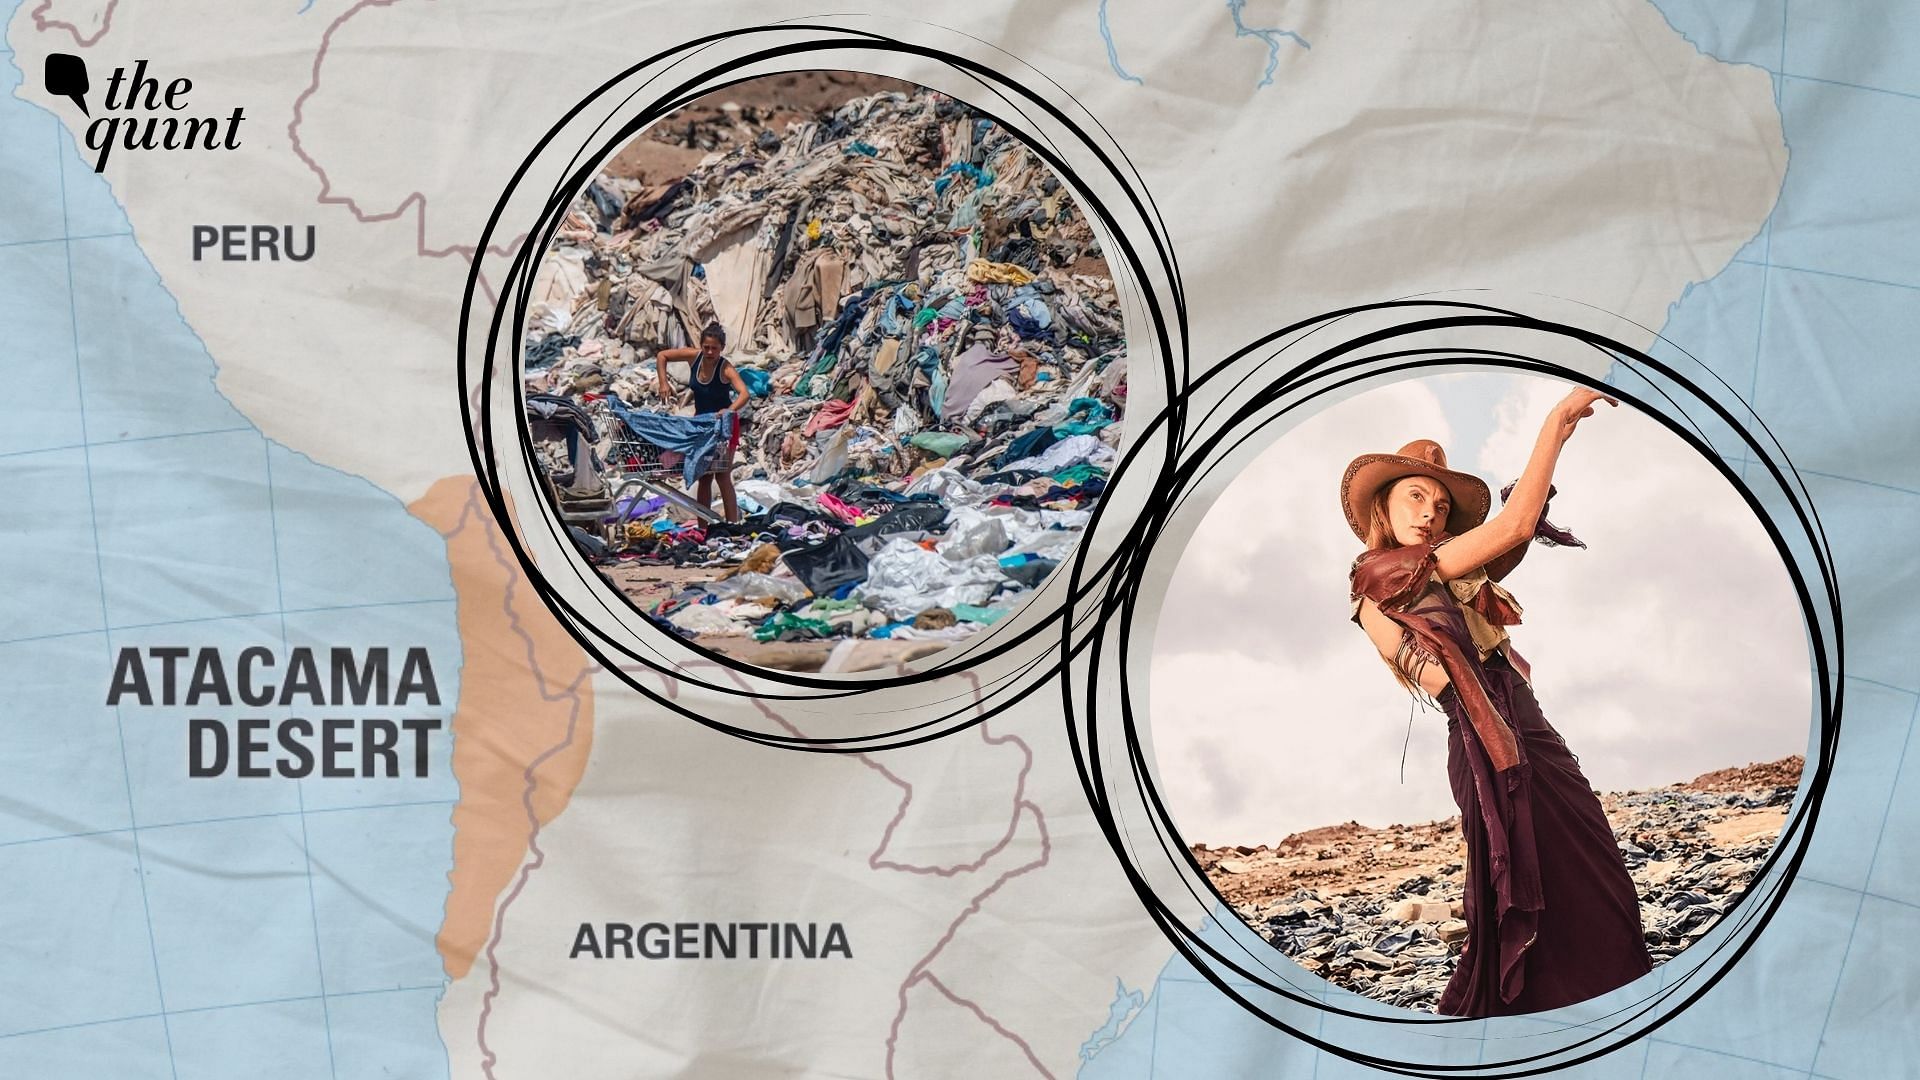 Explained: How Atacama Desert Became a Dumping Ground For Discarded Fast Fashion